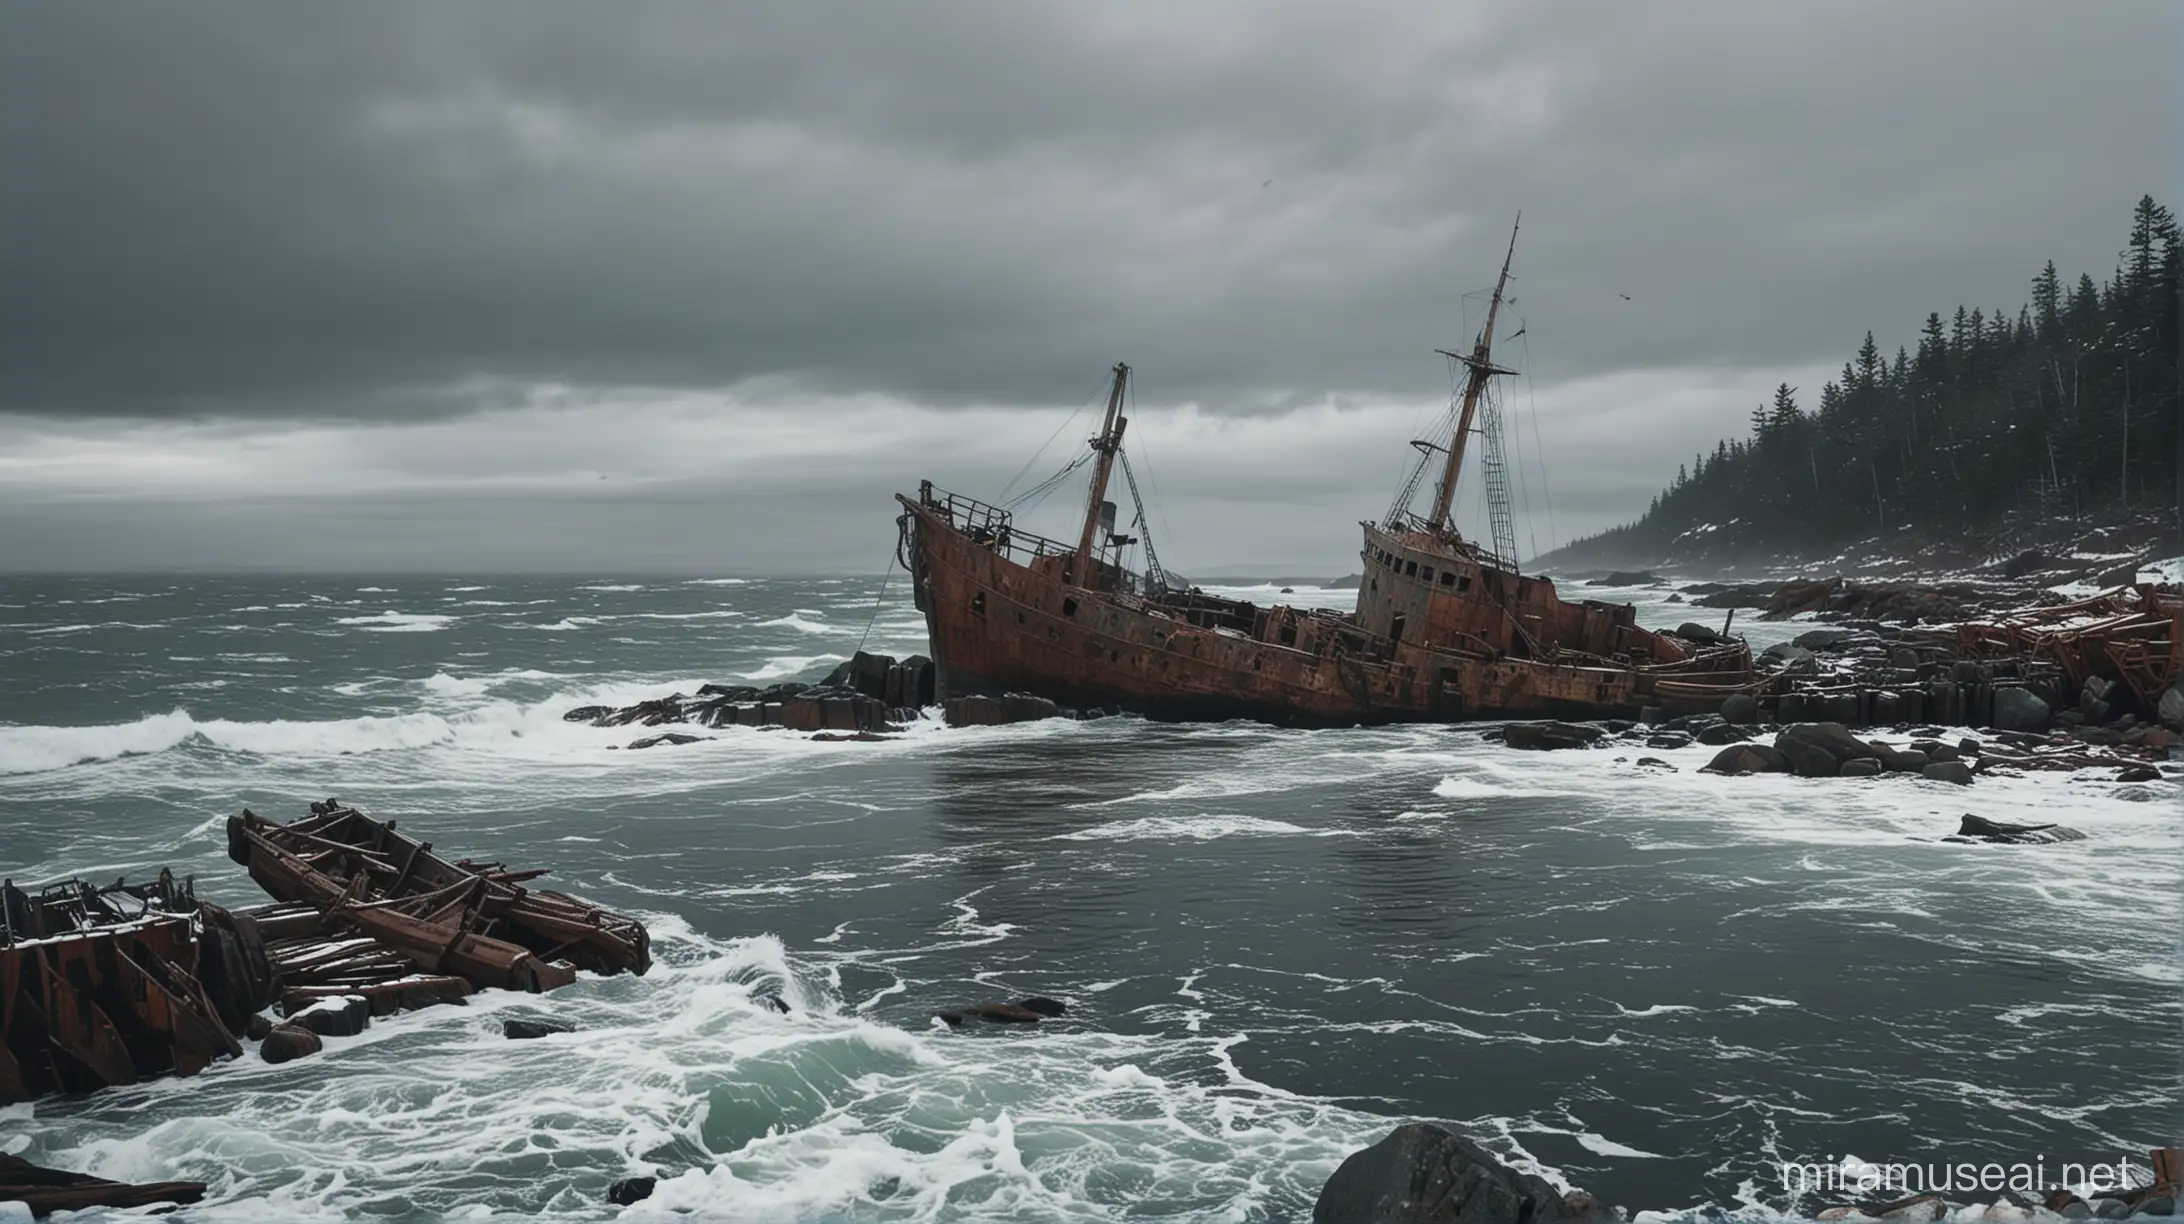 old shipwreck on a rocky shore in nova scotia in winter,cinematic, realistic, stormy sea, stormy sky
